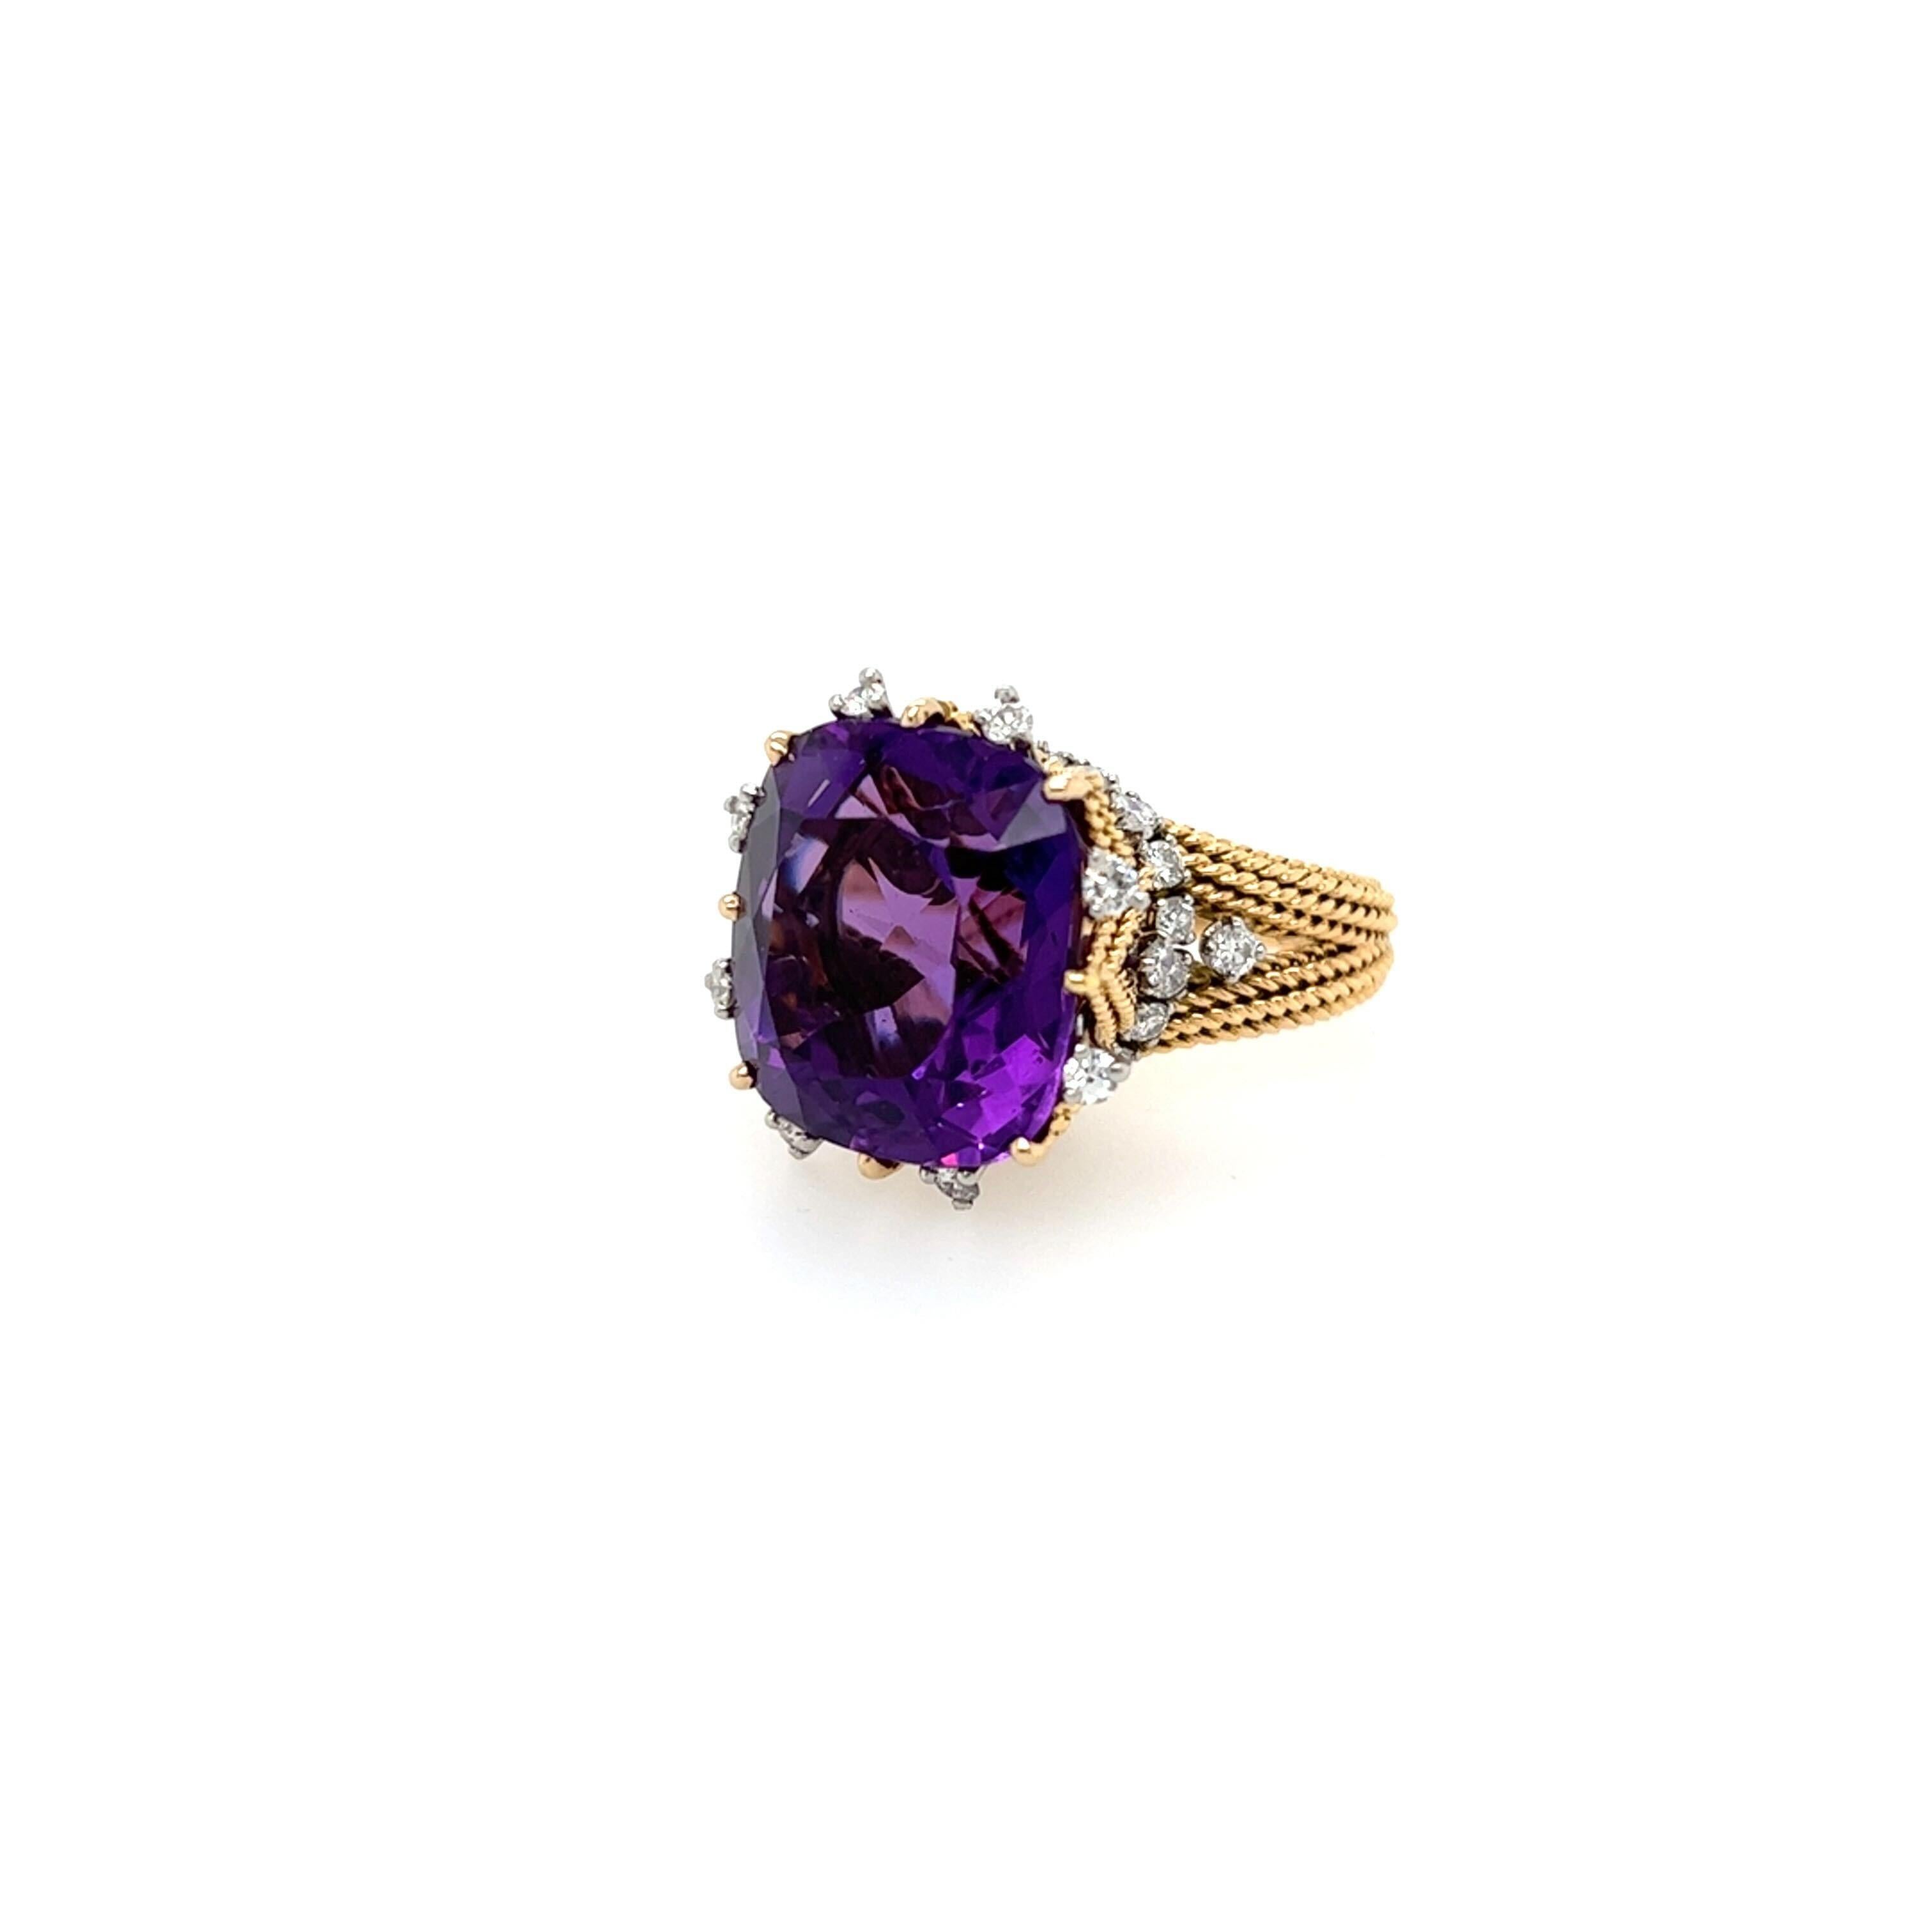 An 18 karat yellow gold, platinum, amethyst and diamond ring, Sterle.  Centering a cushion cut amethyst measuring approximately 16.71 x 15.97 mm. in an elevated crown form setting of ropework enhanced with approximately twenty eight (28) platinum